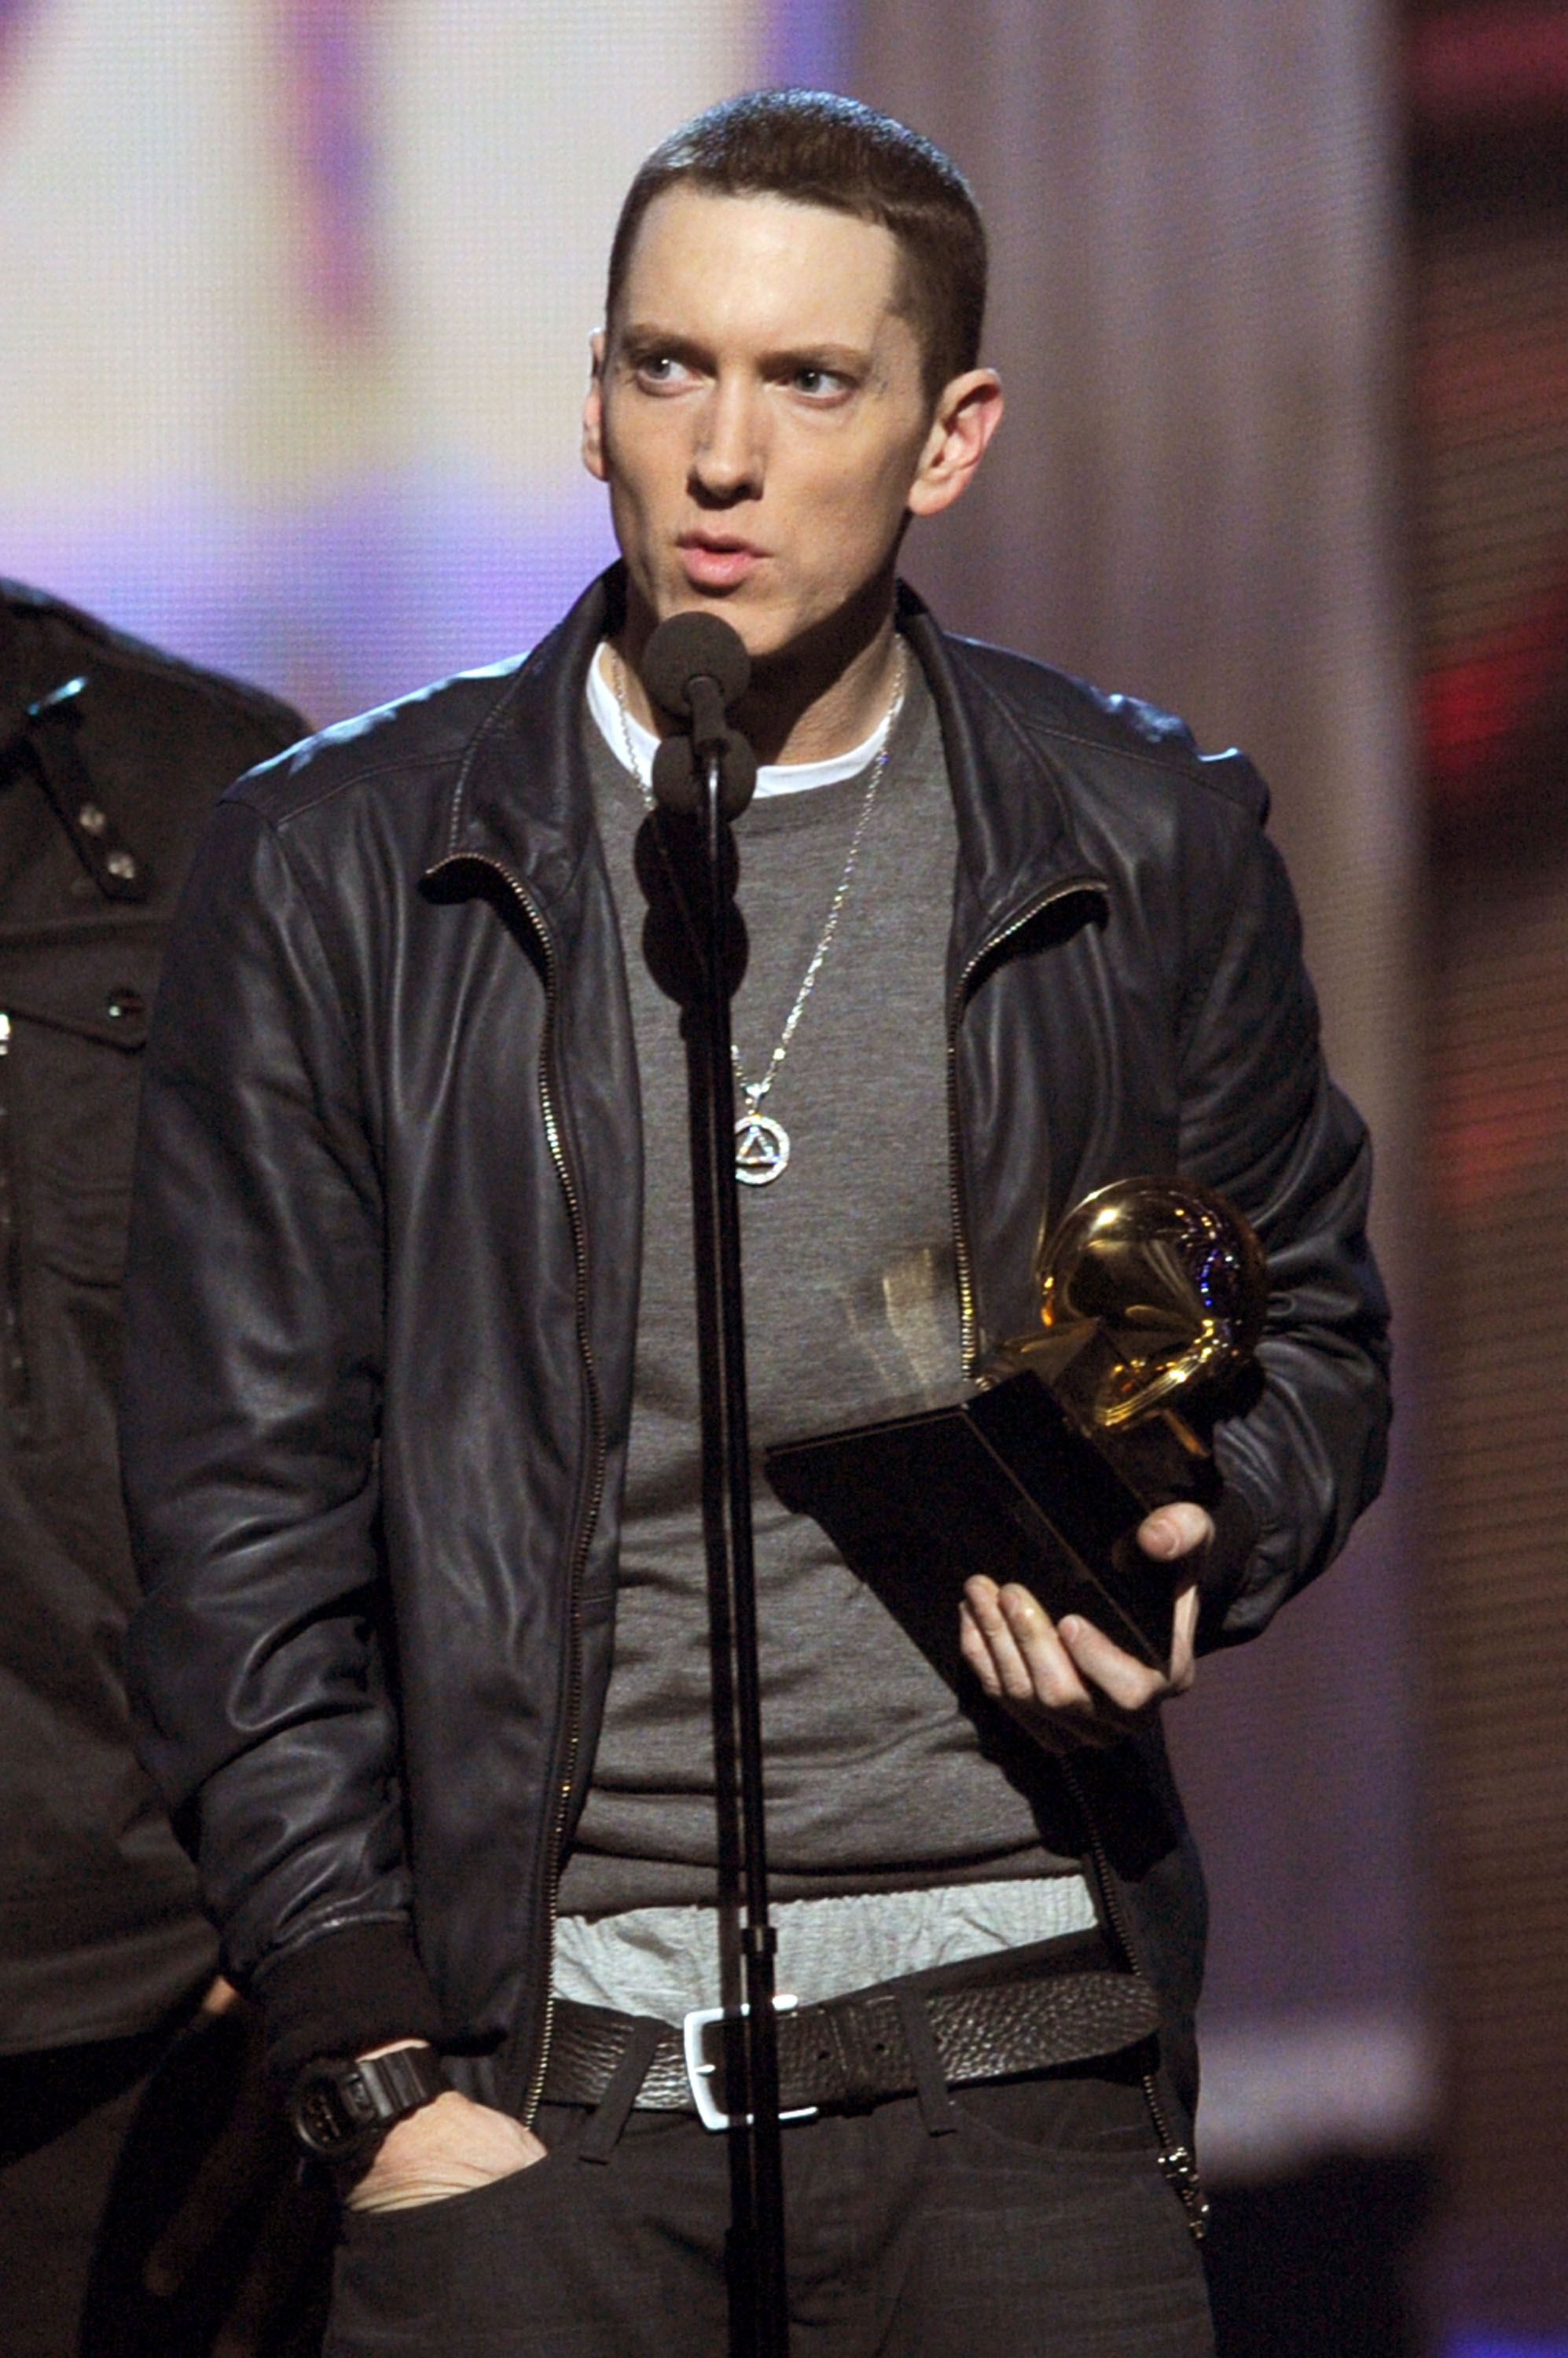 Eminem accepts the Best Rap Album Award for "Recovery" onstage during The 53rd Annual GRAMMY Awards held at Staples Center on February 13, 2011 | Photo: Getty Images